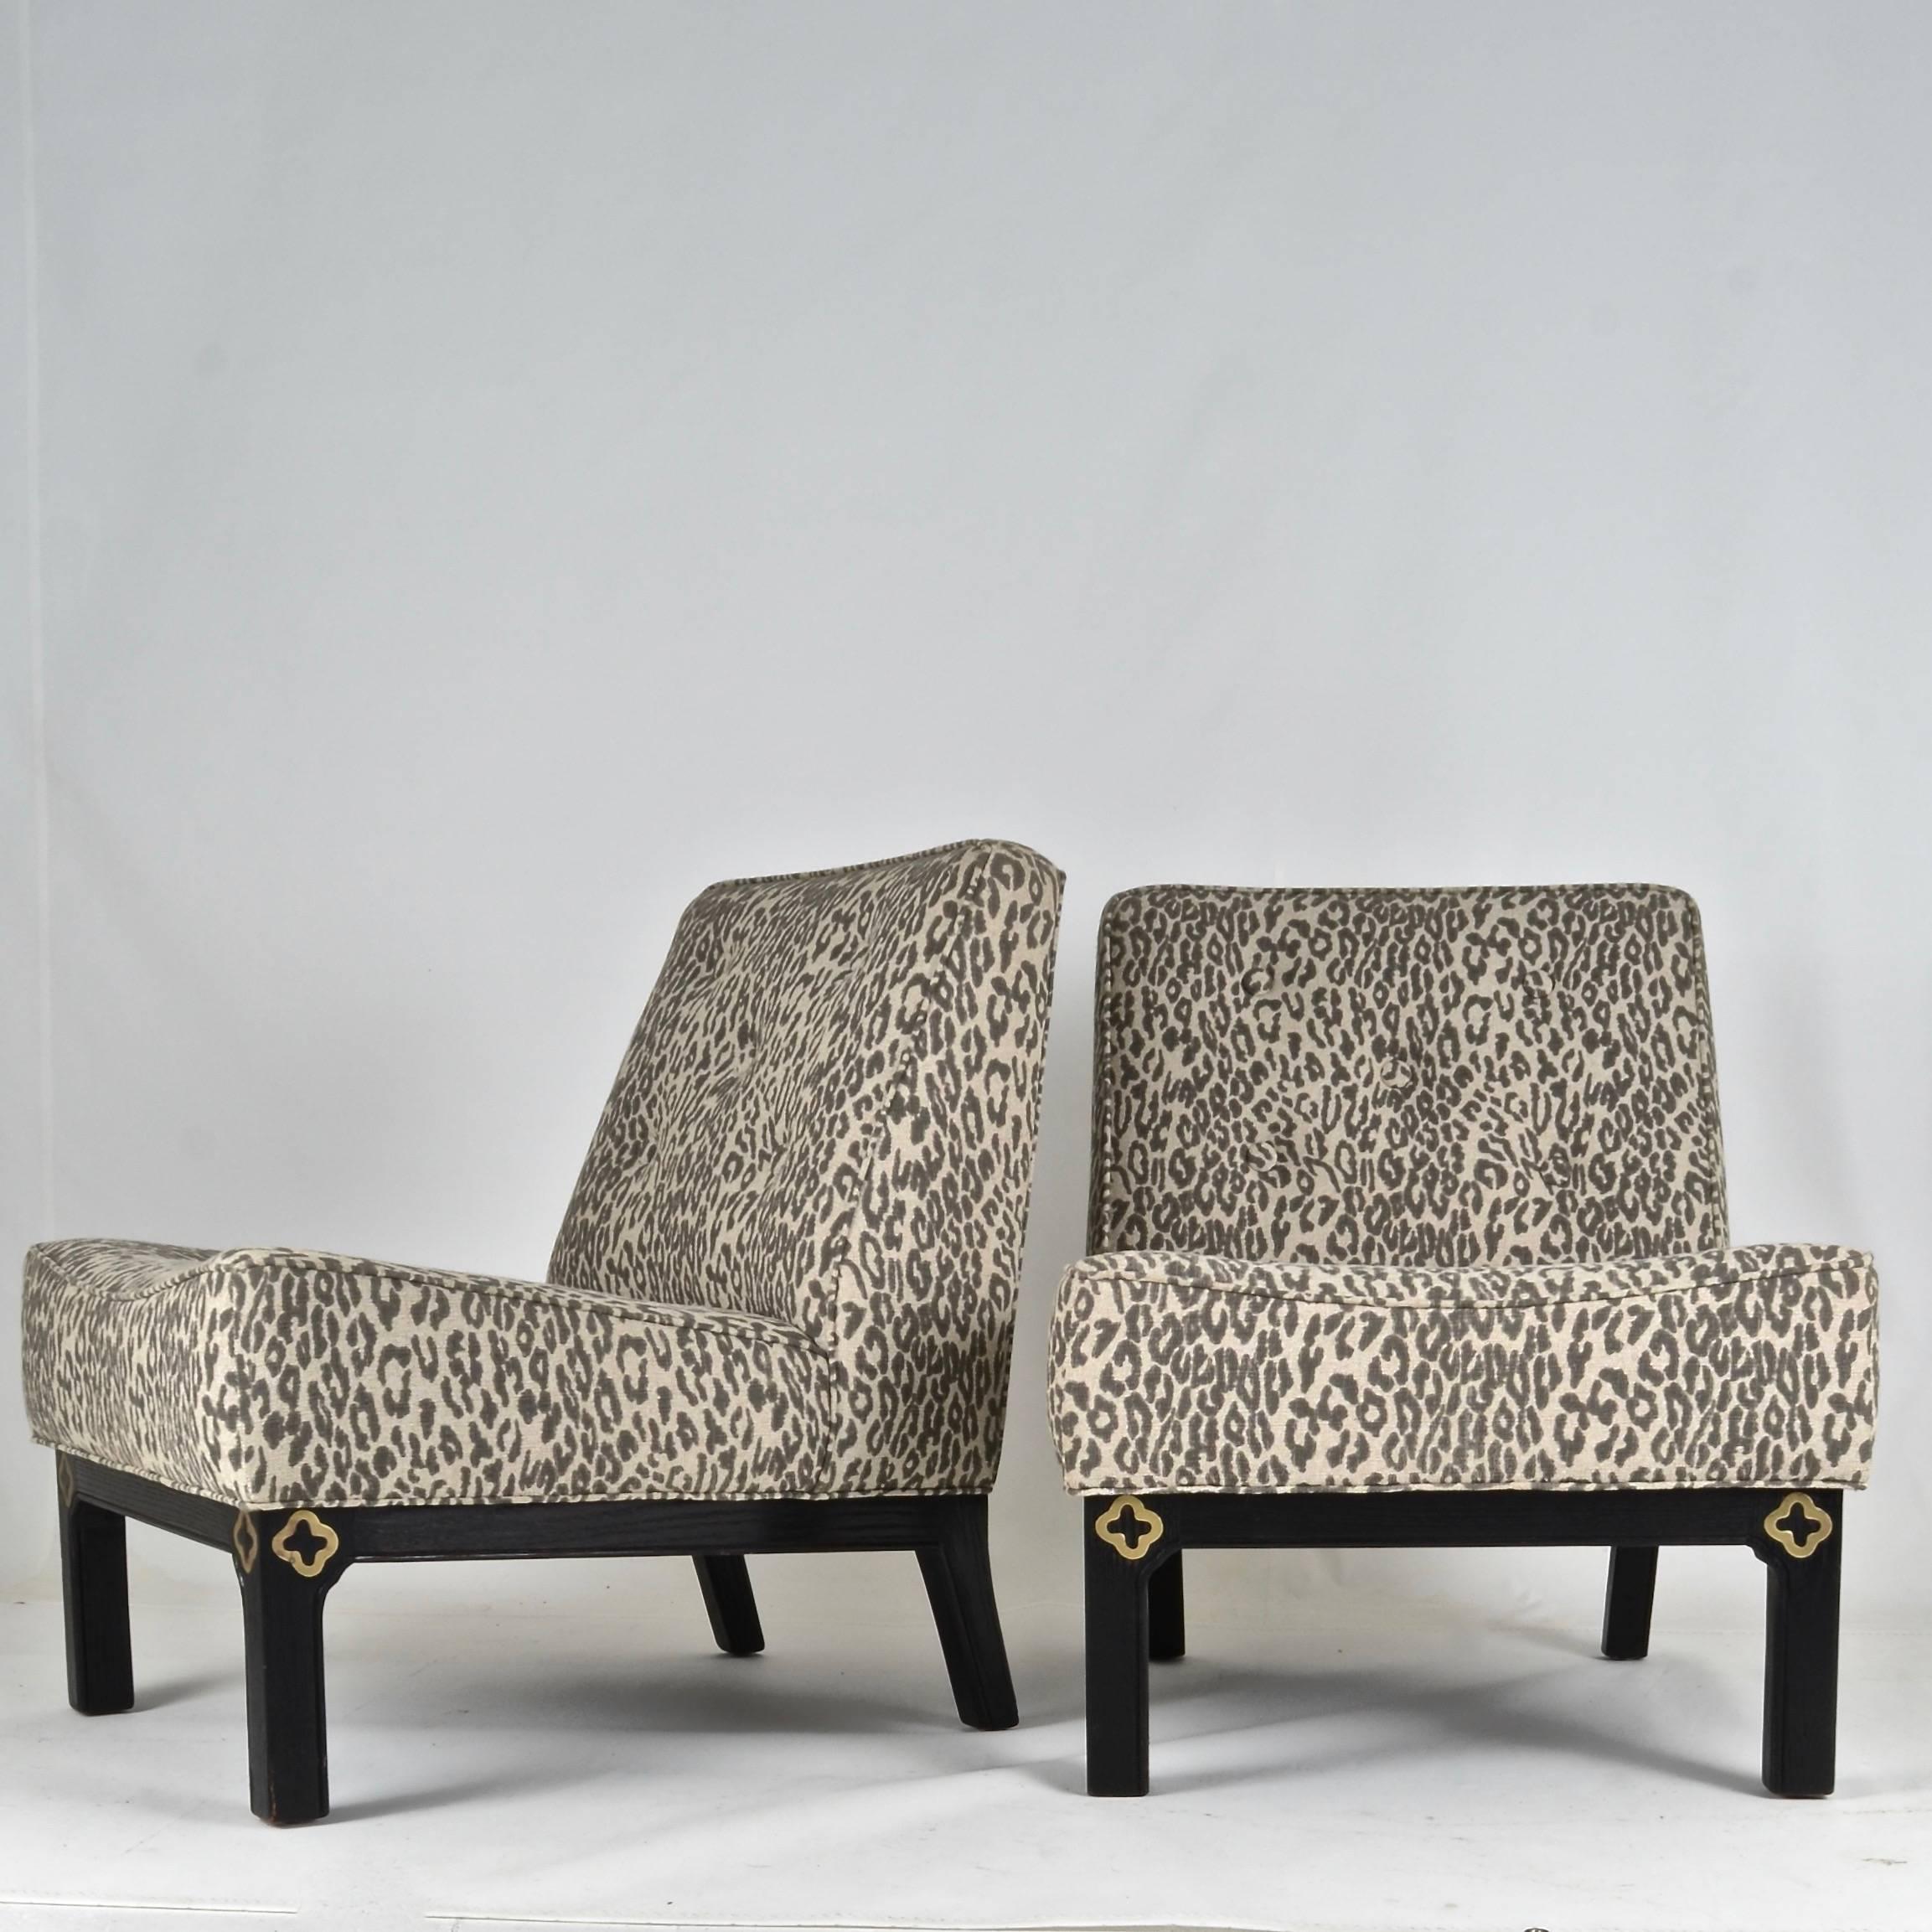 A super pair with great lines, newly upholstered in a leopard print jacquard. Featuring button details and inlaid brass decoration on the front legs. Frame is ebonized retaining wood grain. Very fine quality construction, solid and heavy.